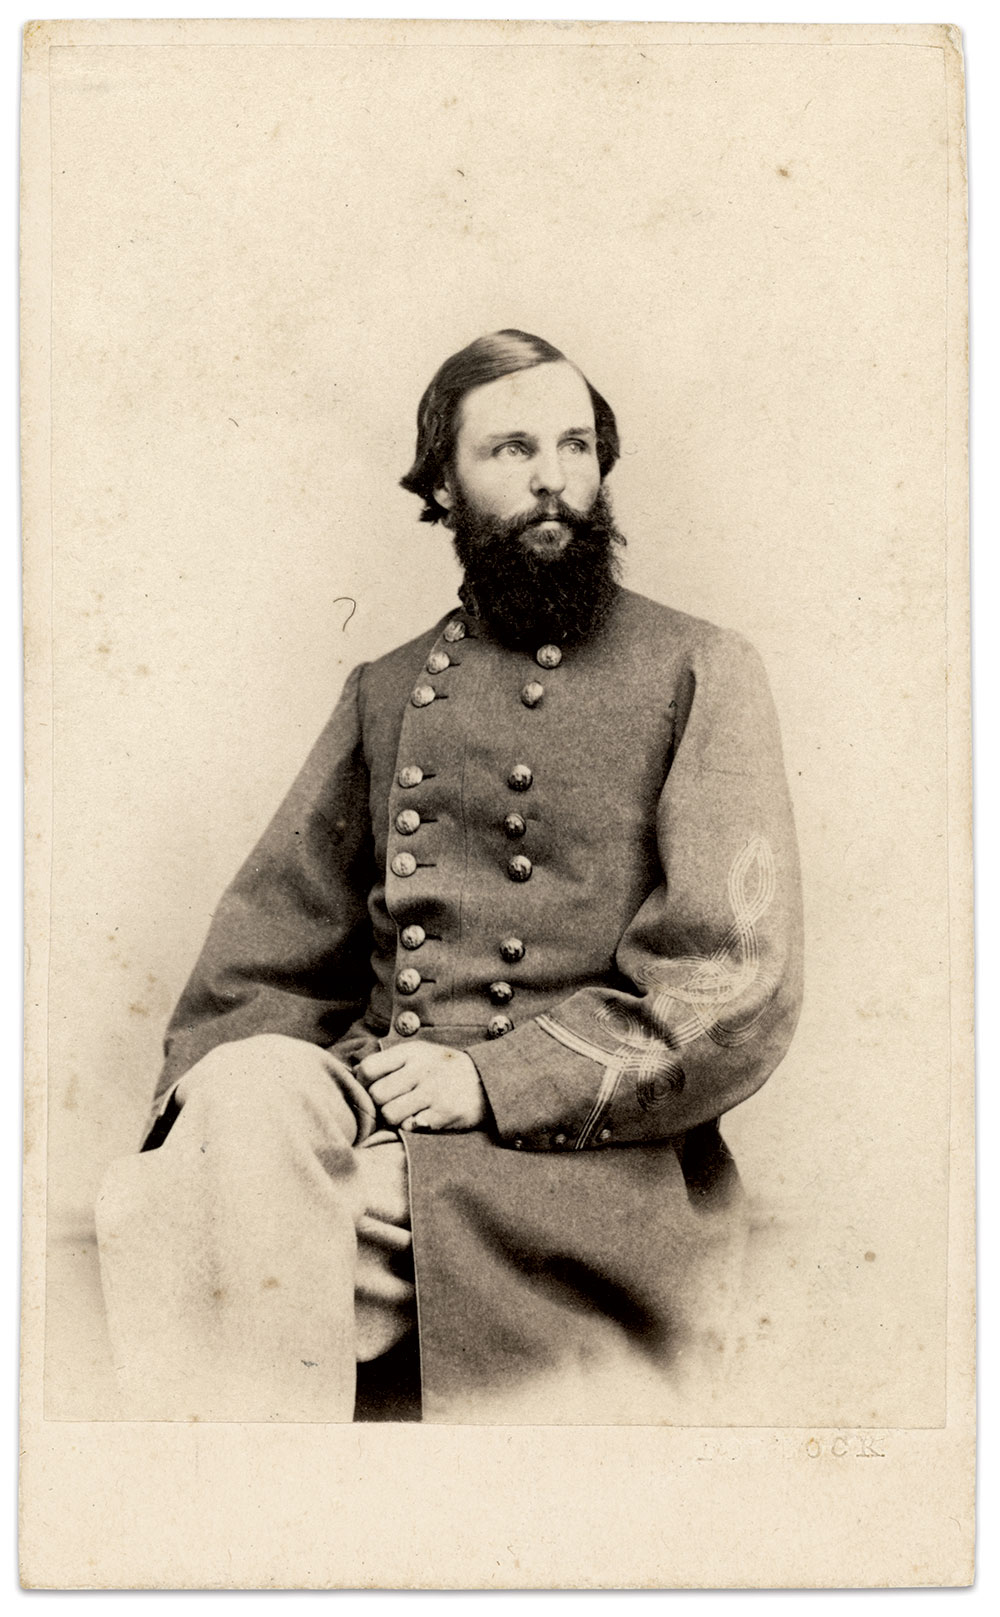 Carte de visite by Henry Pollock of Baltimore, Md.